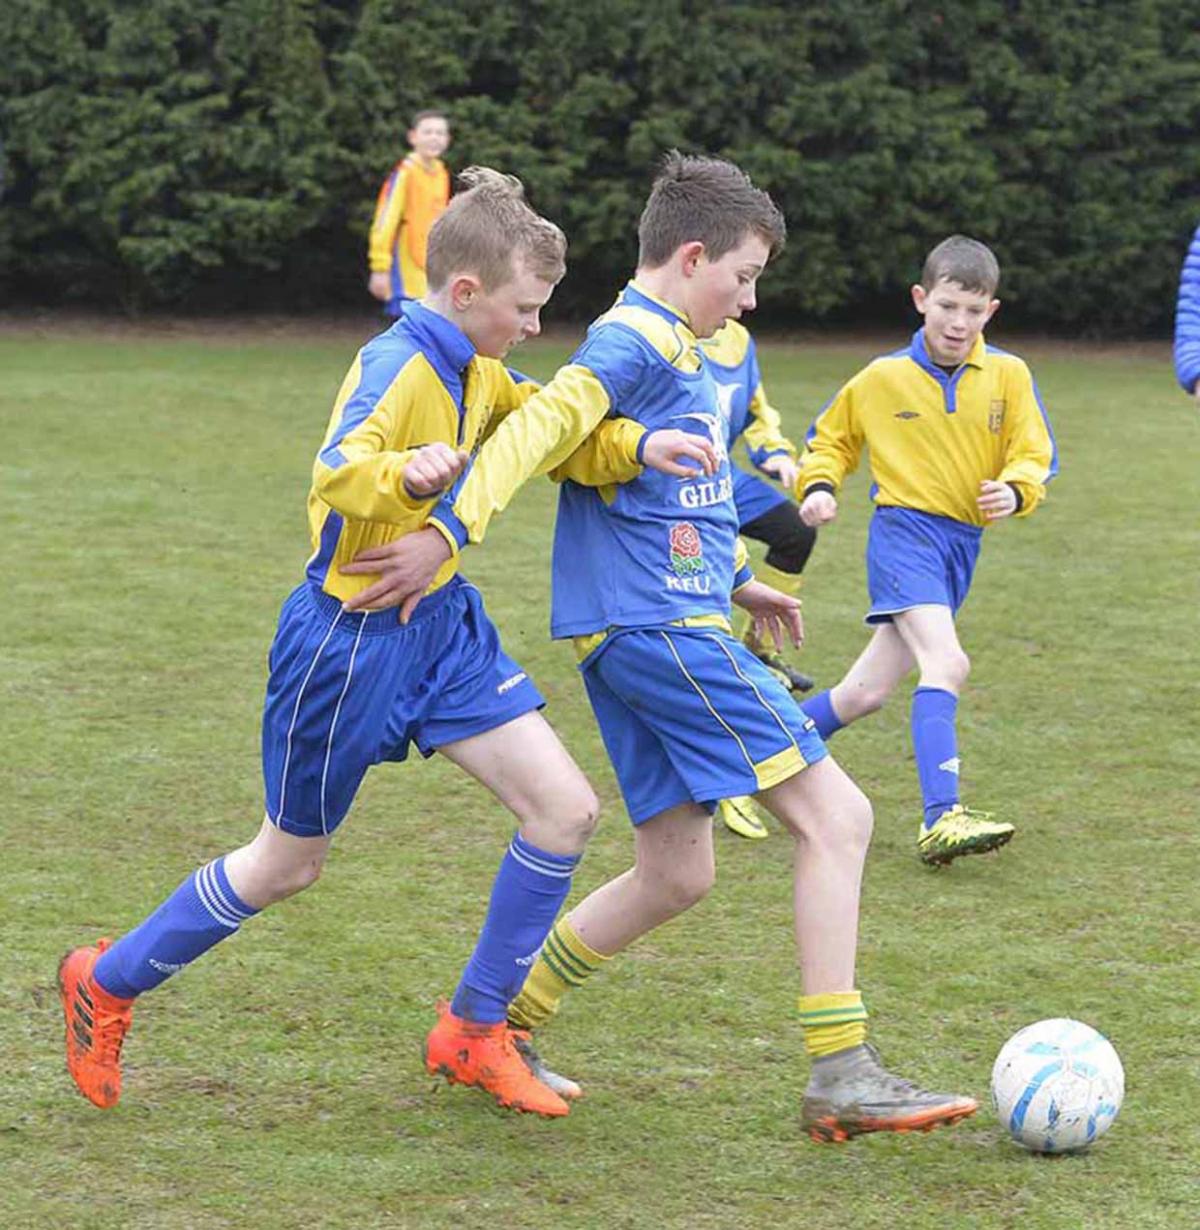 Primary school's 5 a side football tournament  at Ardleigh